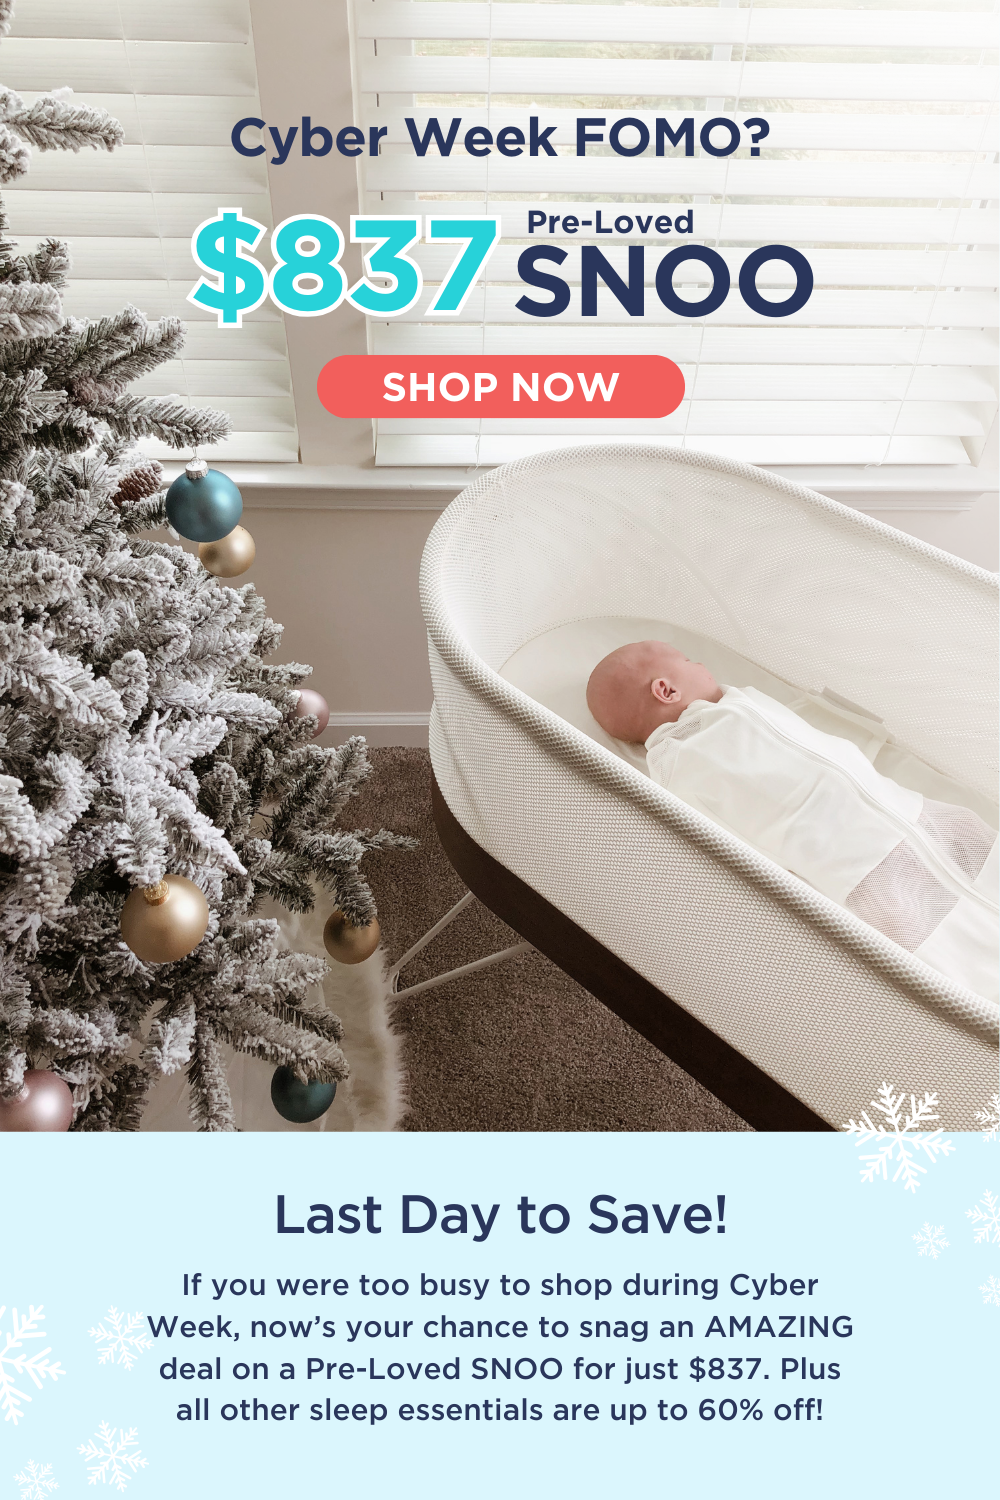 Cyber Week FOMO? 30% OFF Pre-Loved SNOO. SHOP NOW! Last Day to Save! If you were too busy to shop during Cyber Week, now’s your chance to snag an AMAZING deal on a Pre-Loved SNOO for just \\$837. Plus all other sleep essentials are up to 60% off!